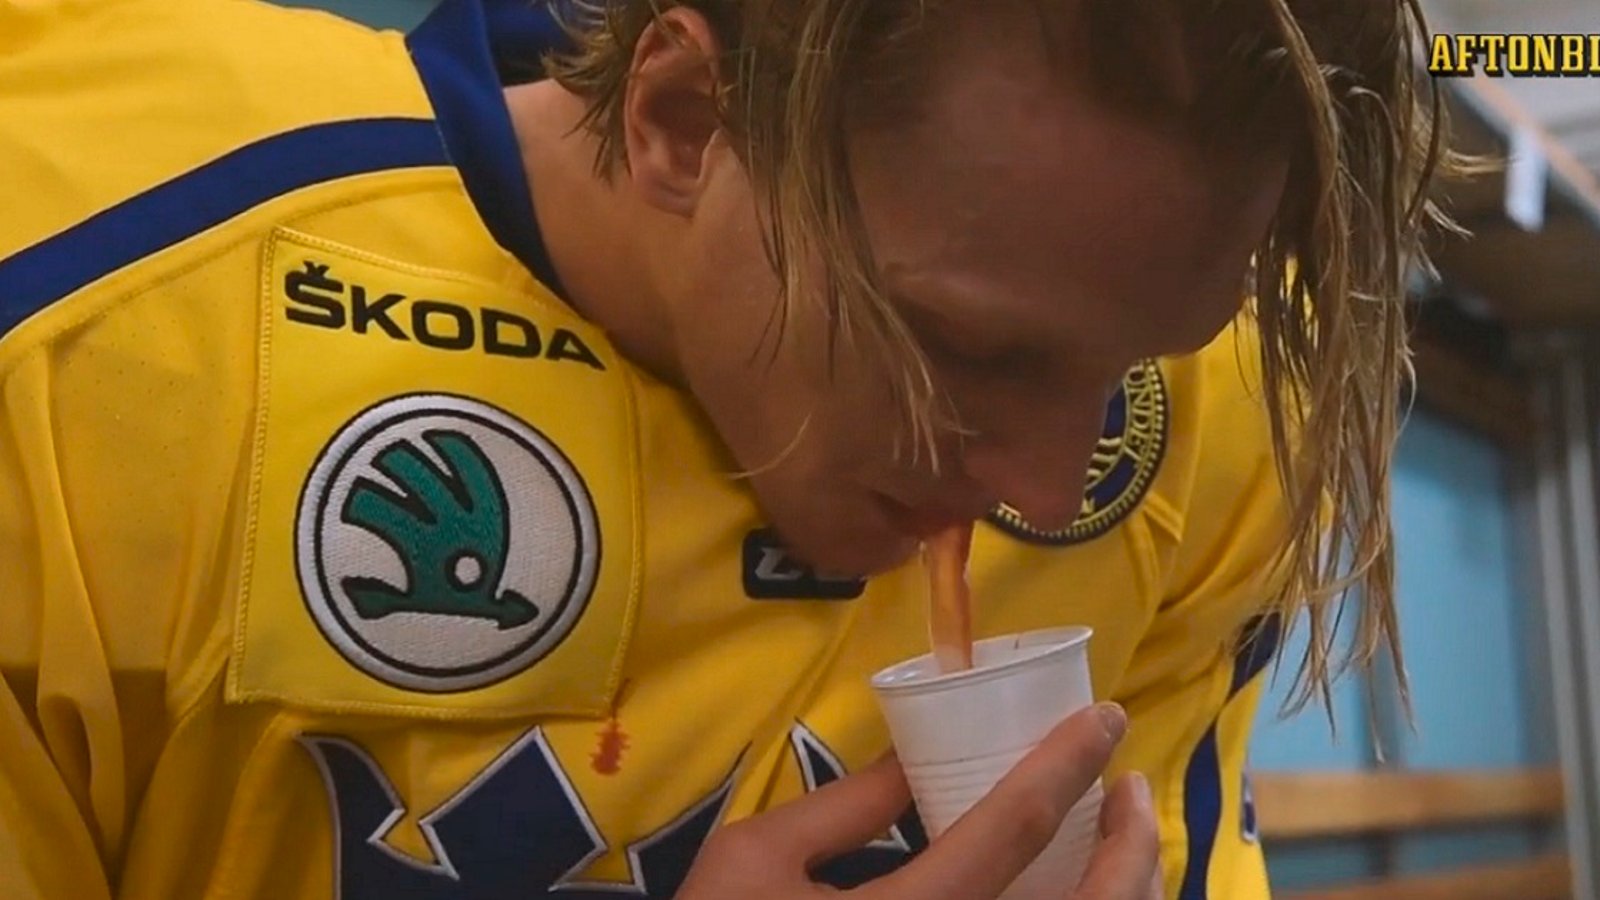 Brutal video shows NHL defenseman spitting out his teeth in the locker room.